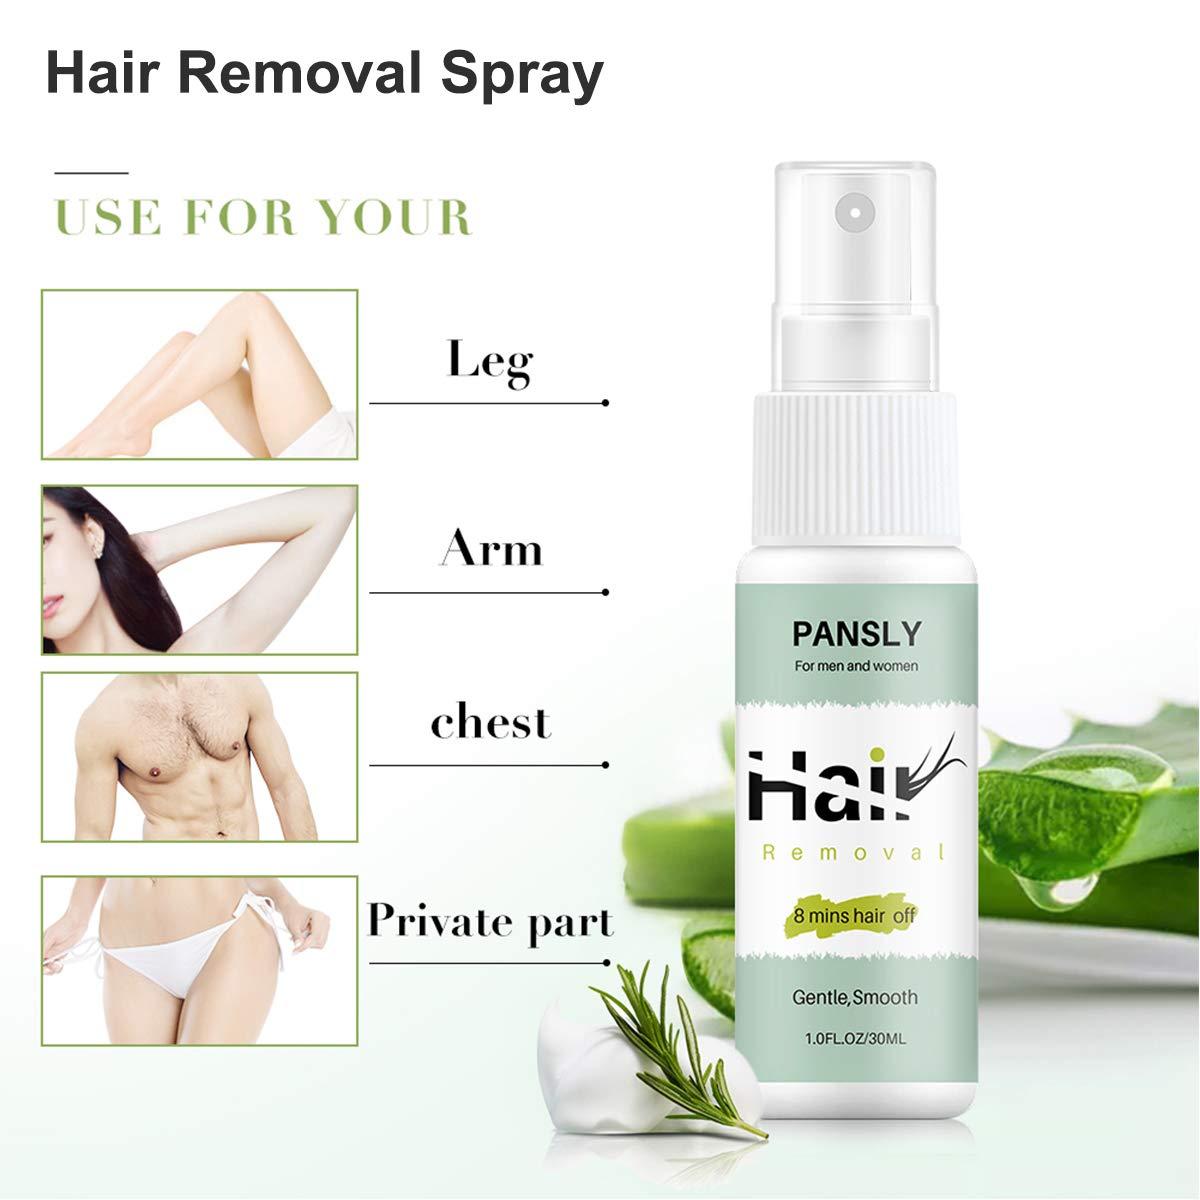 Hair Removal Spray,8 Minutes Hair Off Hair Removal Spray Legs Arms Gentle  Hair Remover for Face, Underarm, Arm, Leg, Bikini,Non-Irritating  Depilatories Product for Women and Men,30ML